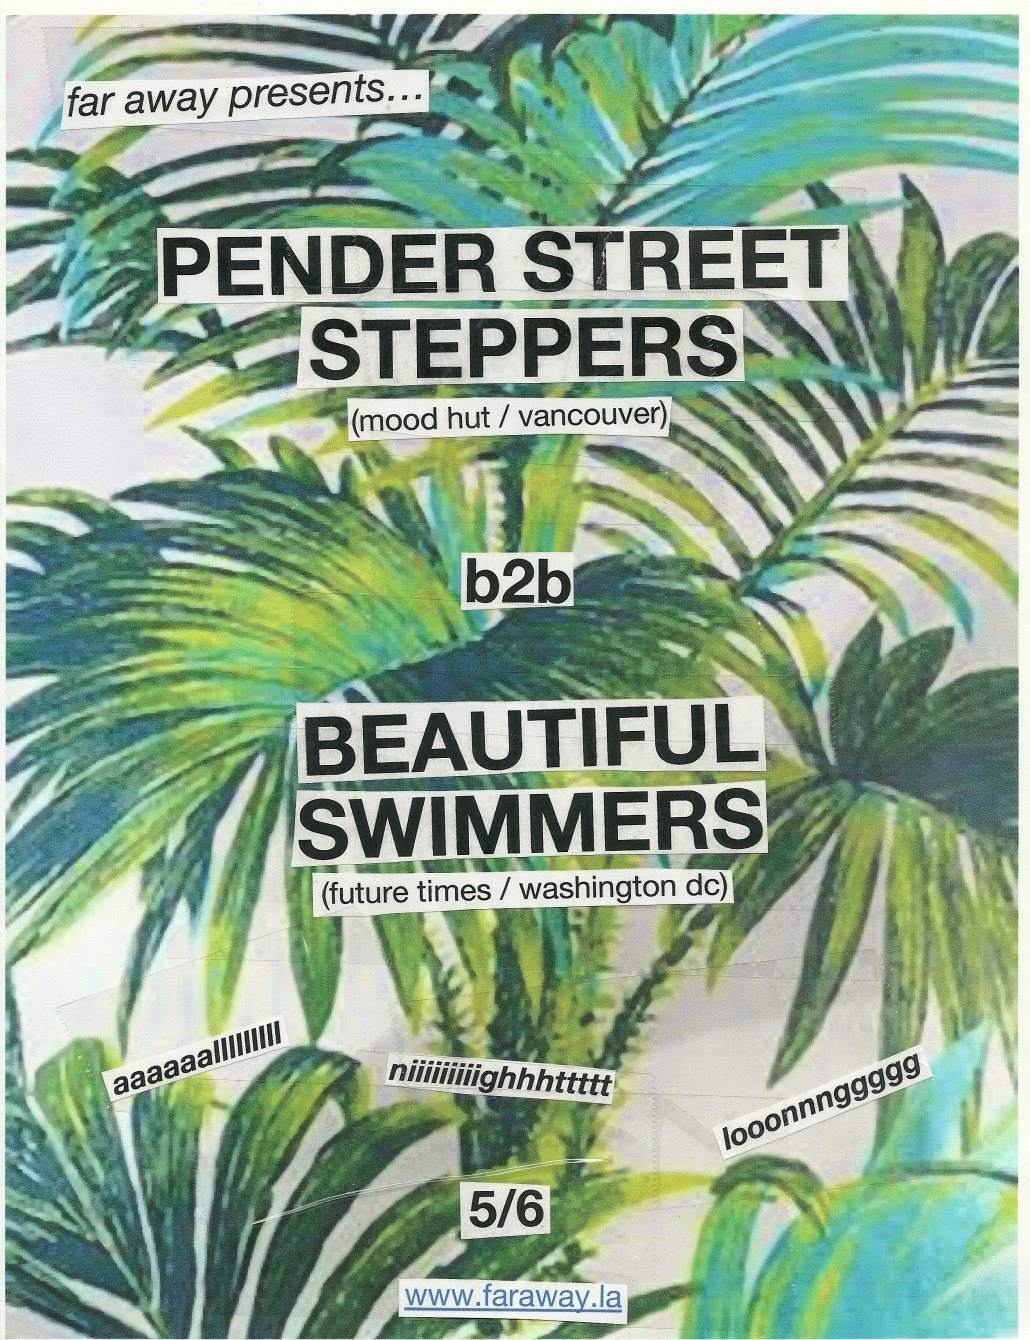 Far Away presents Pender Street Steppers vs Beautiful Swimmers - フライヤー表